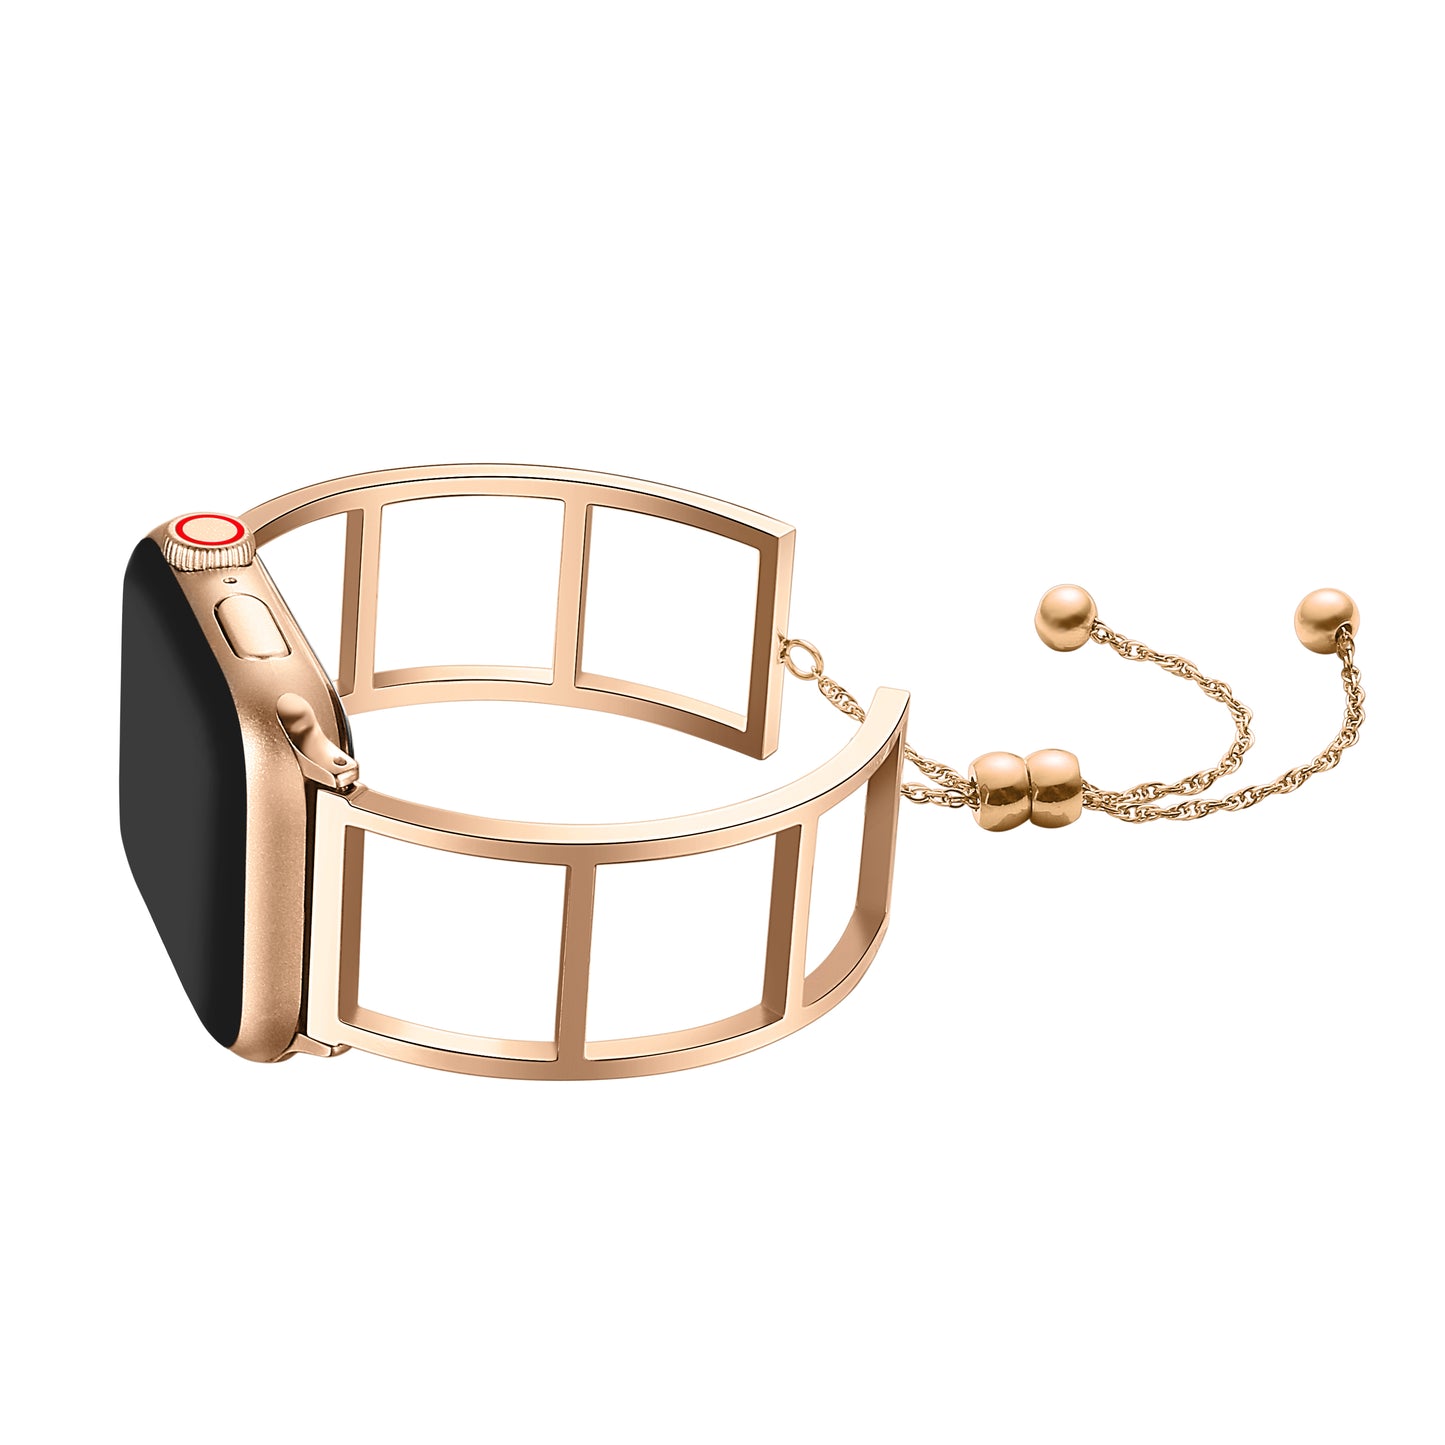 Alice Rose Gold Stainless Steel Replacement band for Apple Watch